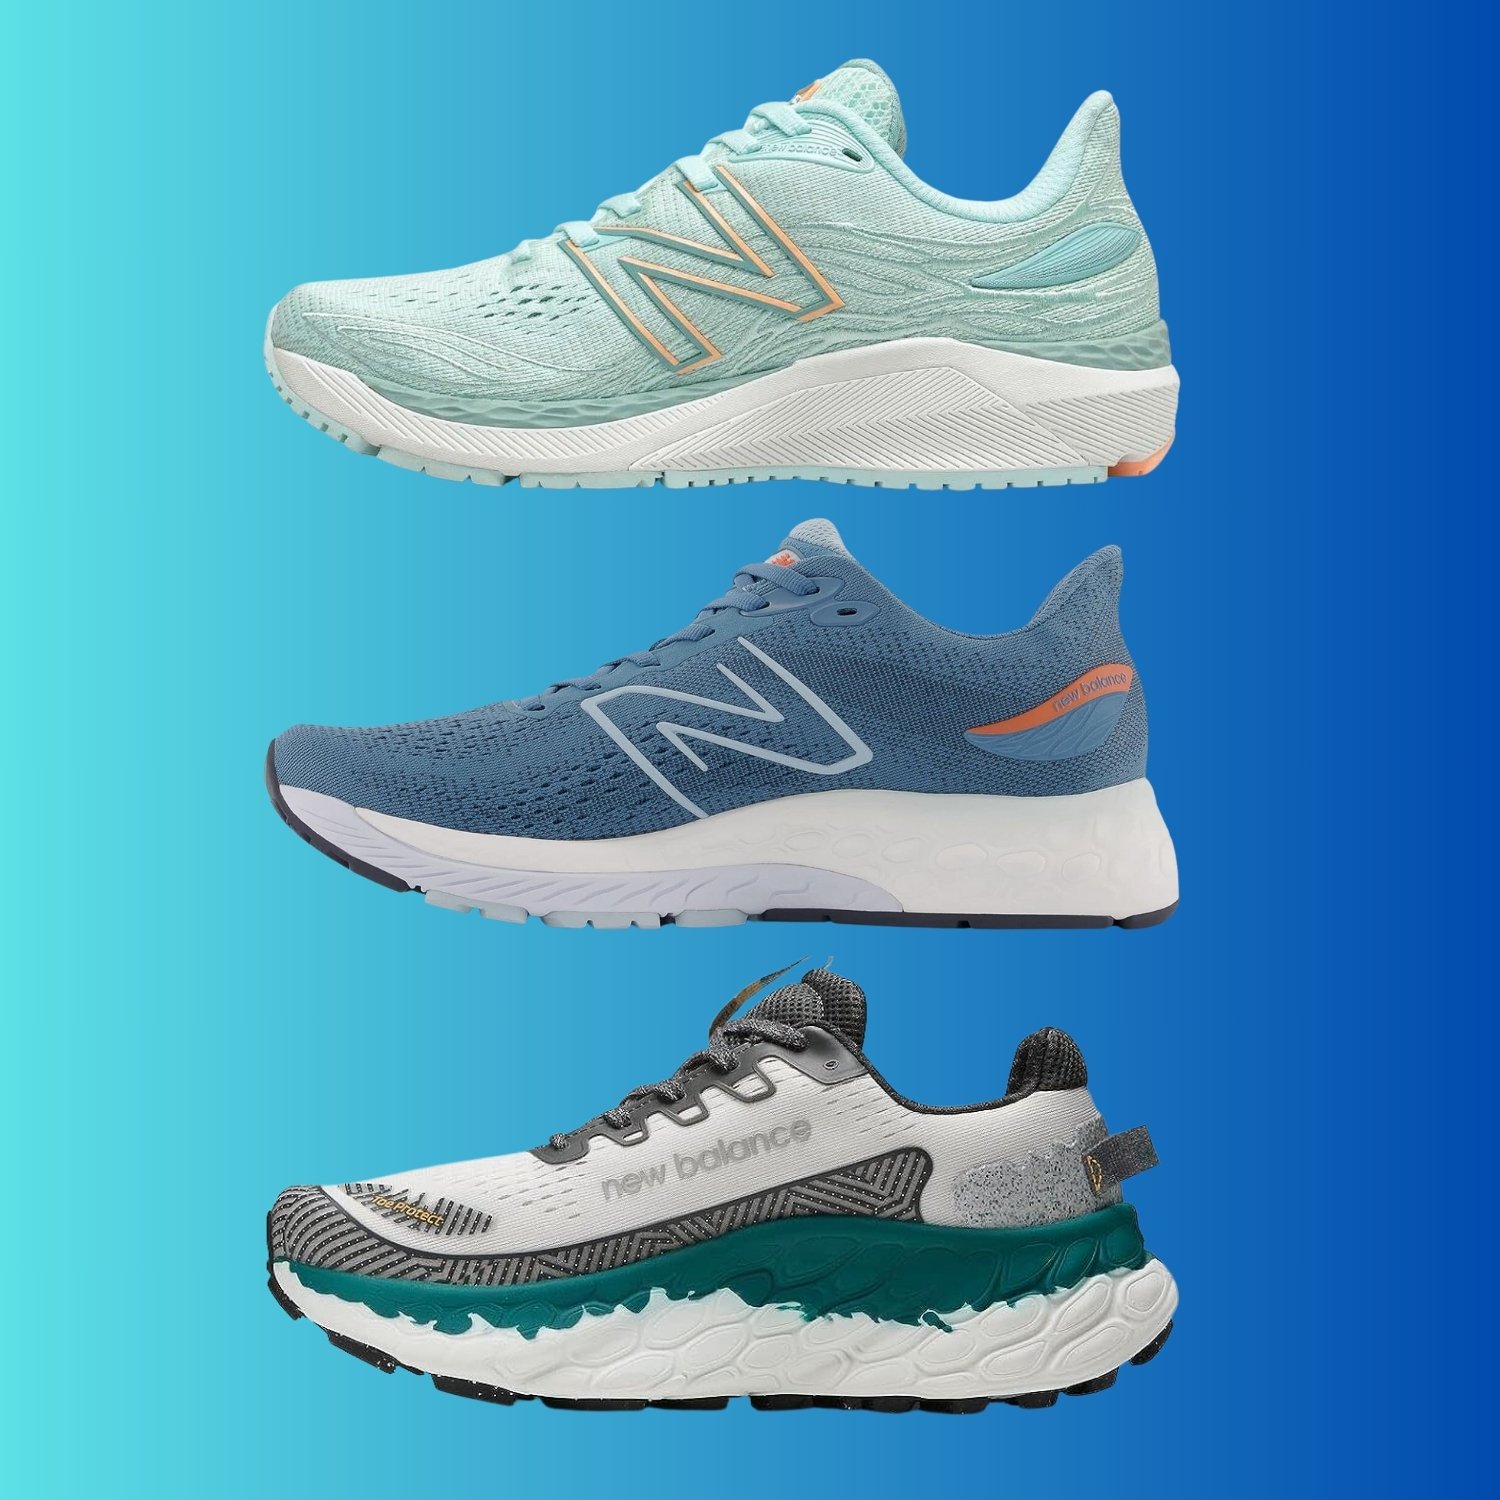 Best New Balance Shoes for Neuropathy